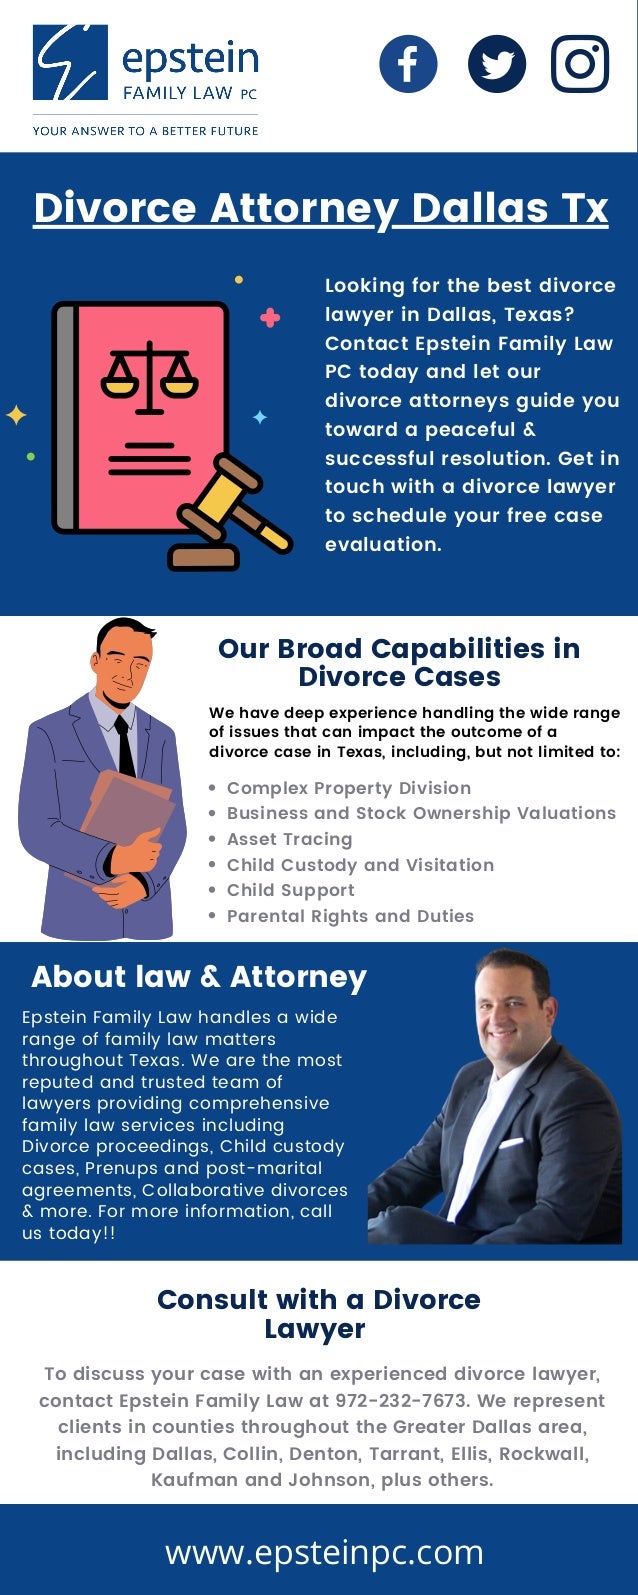 Epstein Family Law handles a wide
range of family law matters
throughout Texas. We are the most
reputed and trusted team of
lawyers providing comprehensive
family law services including
Divorce proceedings, Child custody
cases, Prenups and post-marital
agreements, Collaborative divorces
& more. For more information, call
us today!!
Complex Property Division
Business and Stock Ownership Valuations
Asset Tracing
Child Custody and Visitation
Child Support
Parental Rights and Duties
Looking for the best divorce
lawyer in Dallas, Texas?
Contact Epstein Family Law
PC today and let our
divorce attorneys guide you
toward a peaceful &
successful resolution. Get in
touch with a divorce lawyer
to schedule your free case
evaluation.
Divorce Attorney Dallas Tx
Our Broad Capabilities in
Divorce Cases
We have deep experience handling the wide range
of issues that can impact the outcome of a
divorce case in Texas, including, but not limited to:
About law & Attorney
Consult with a Divorce
Lawyer
To discuss your case with an experienced divorce lawyer,
contact Epstein Family Law at 972-232-7673. We represent
clients in counties throughout the Greater Dallas area,
including Dallas, Collin, Denton, Tarrant, Ellis, Rockwall,
Kaufman and Johnson, plus others.
www.epsteinpc.com
 